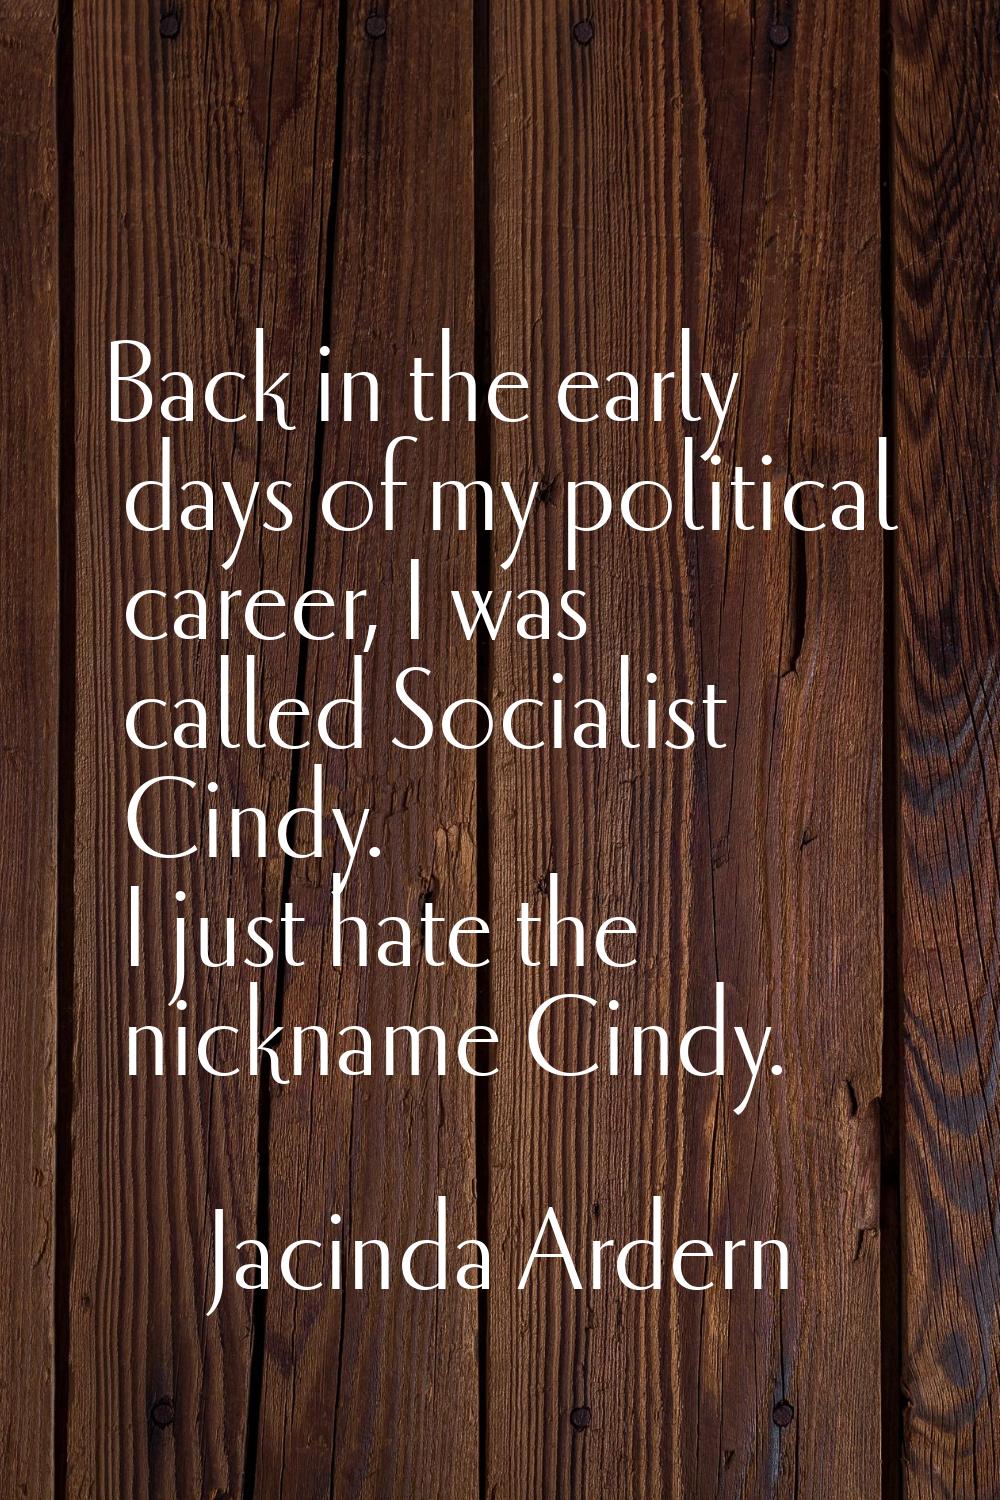 Back in the early days of my political career, I was called Socialist Cindy. I just hate the nickna